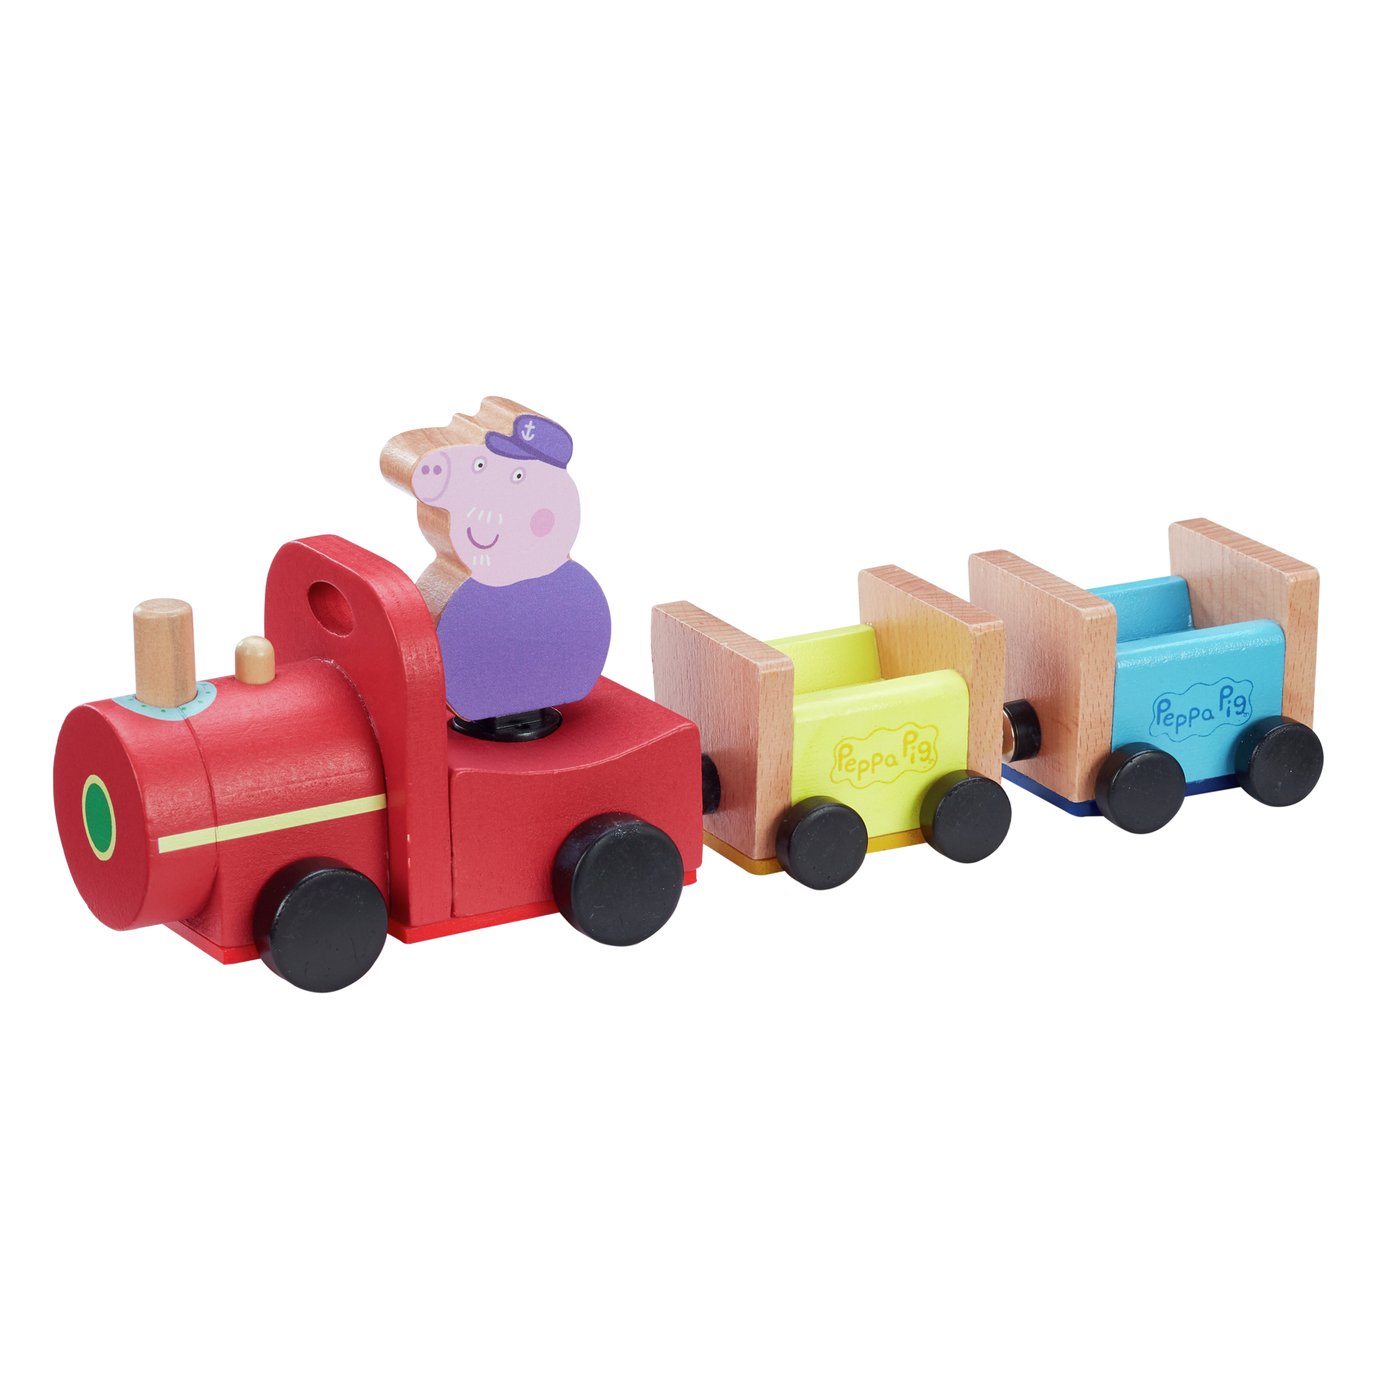 Peppa Pig Peppa's Wood Play Train and Figure Playset Review